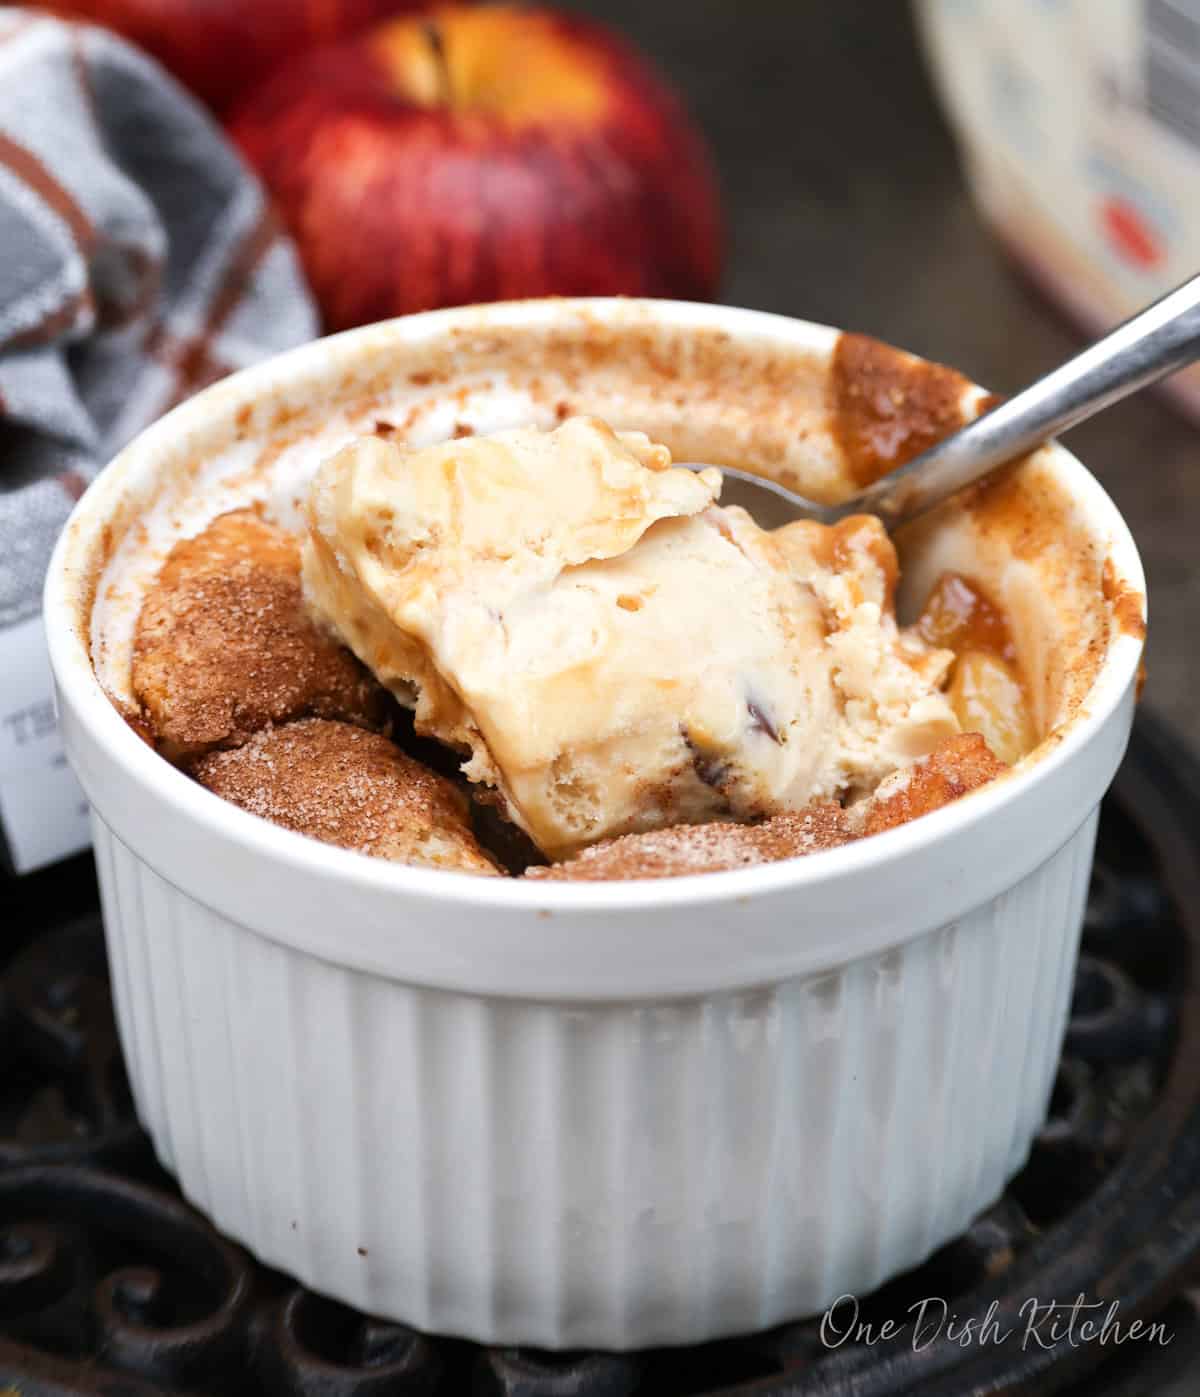 an apple cobbler topped with ice cream.